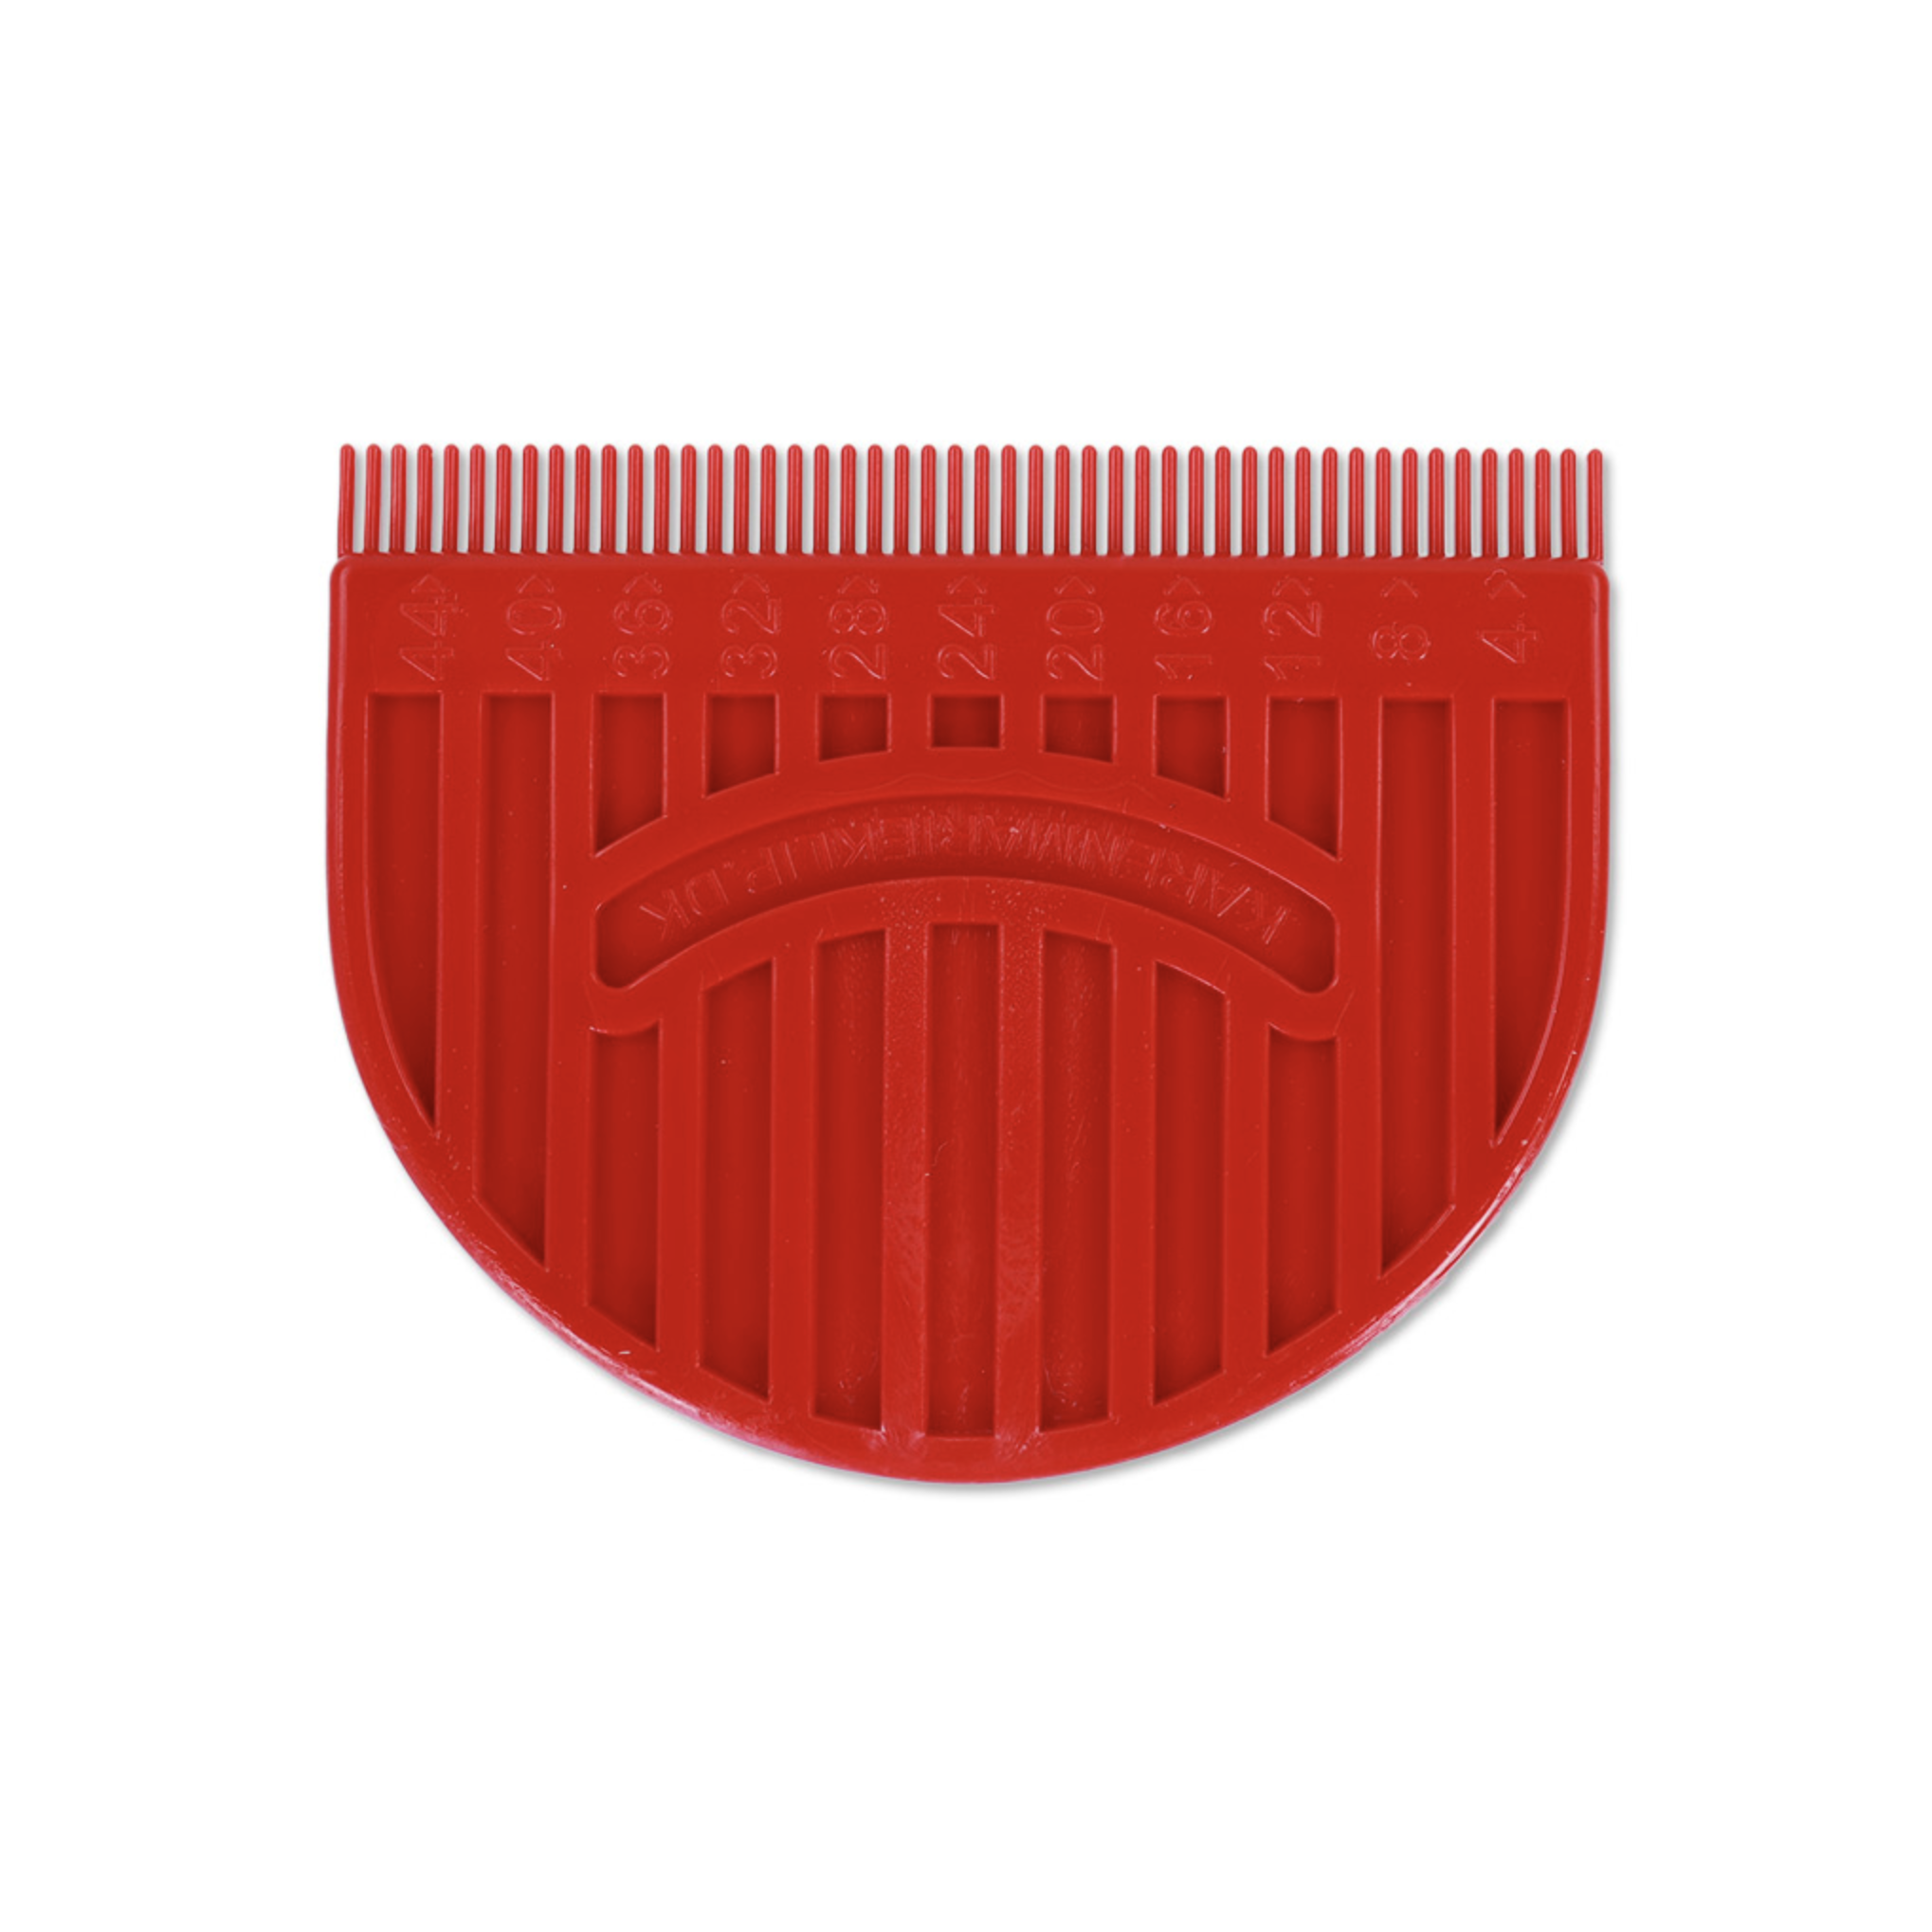 Superfine Comb by km - Rd L 6 cm